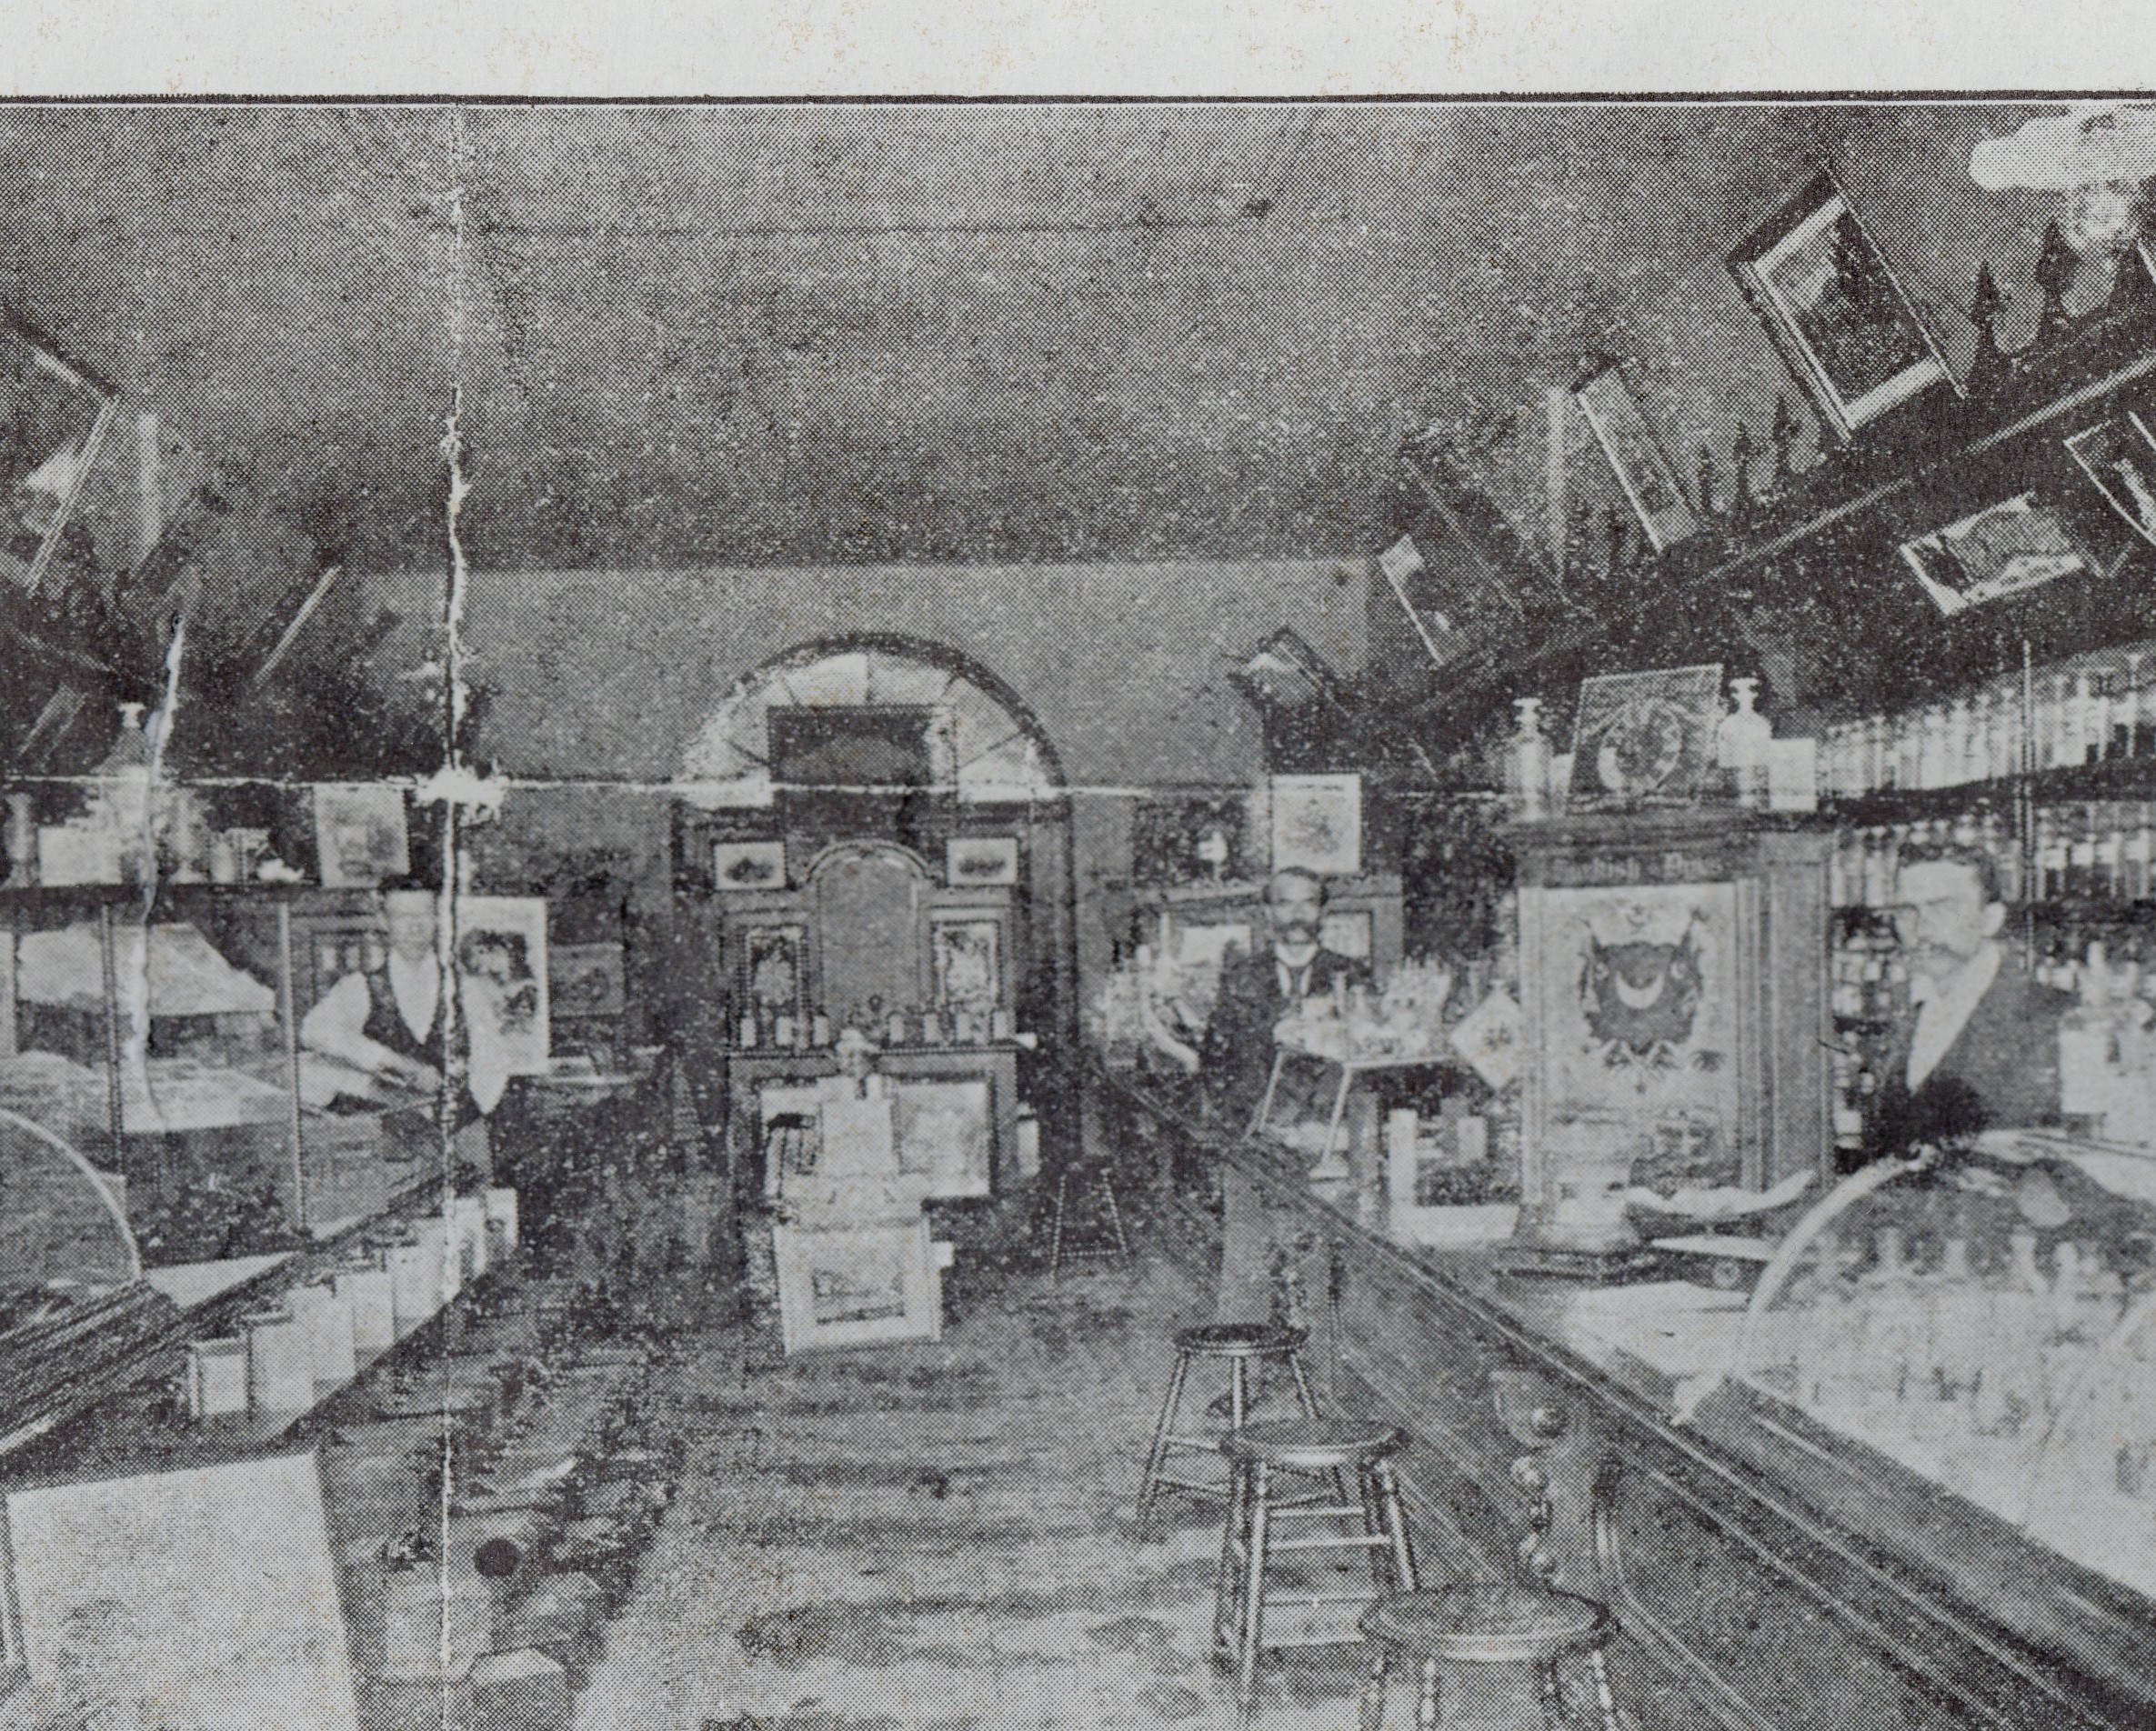 Photo showing the interior of McCollom's drug store. Two men stand on either side of the store behind counters. Bottles, cans, and other containers and materials for sale line shelves and are displays on tables.